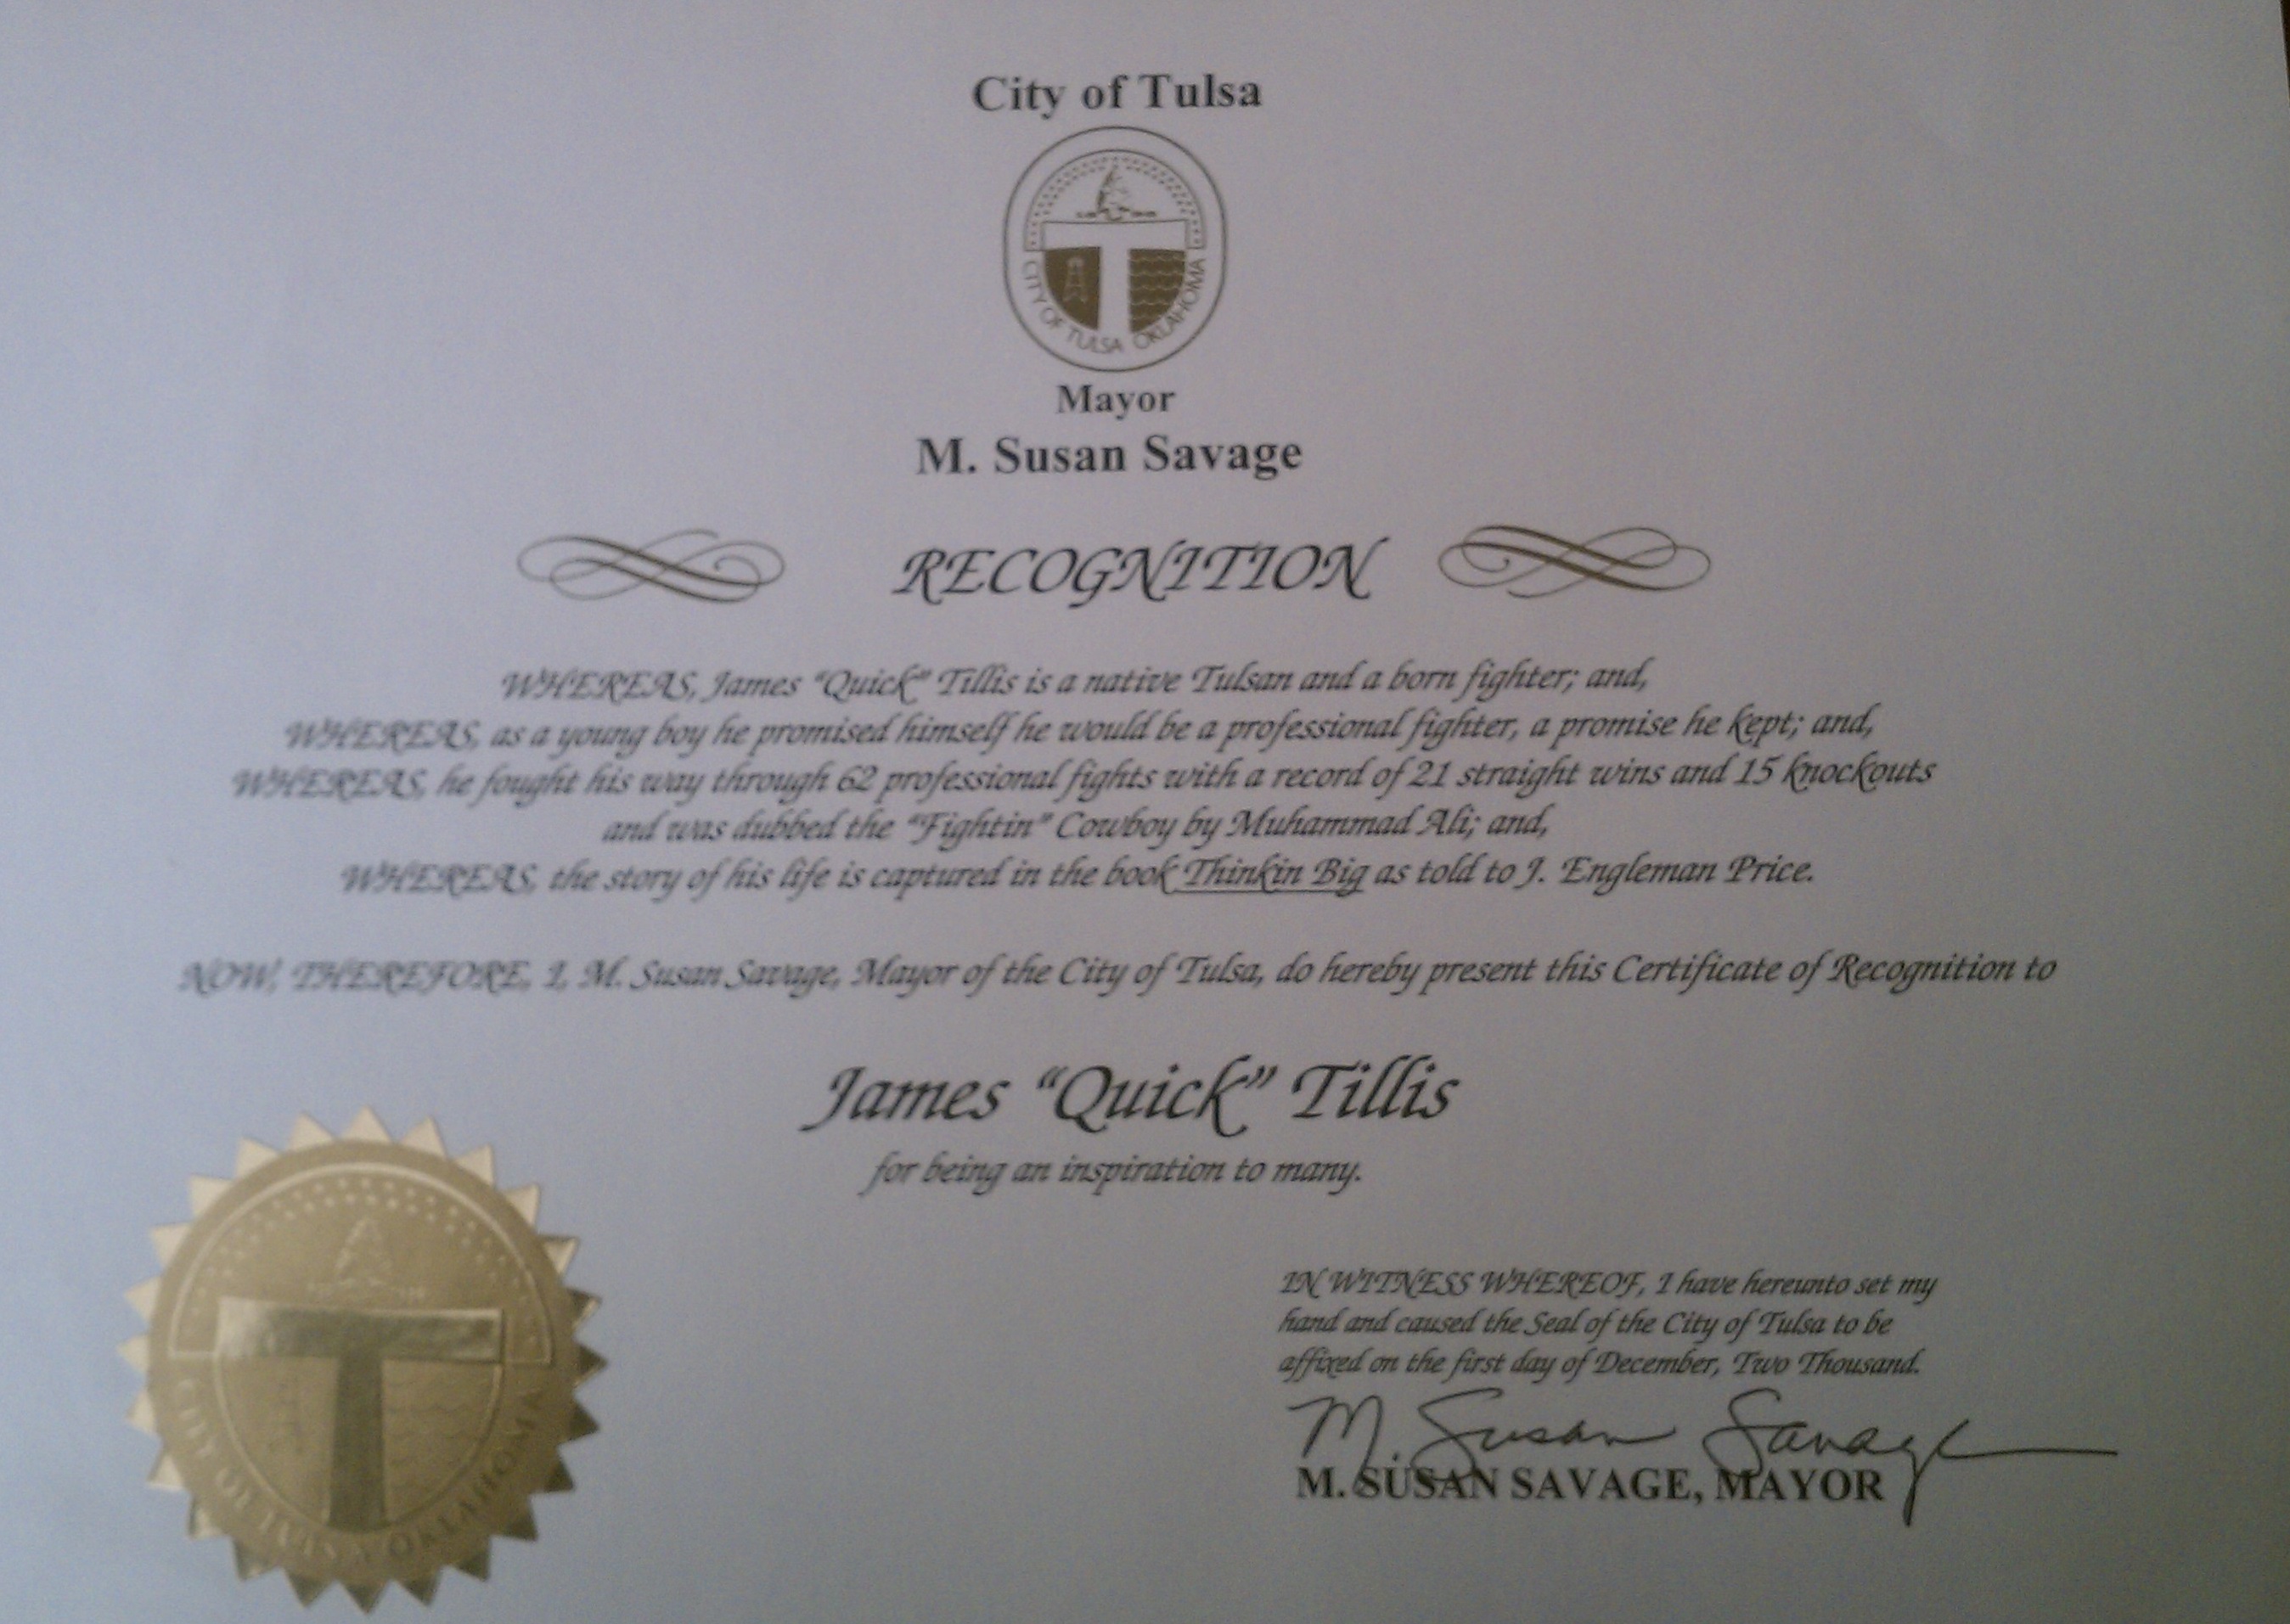 JQT- TULSA MAYORS' CERTIFICATE OF RECOGNITION